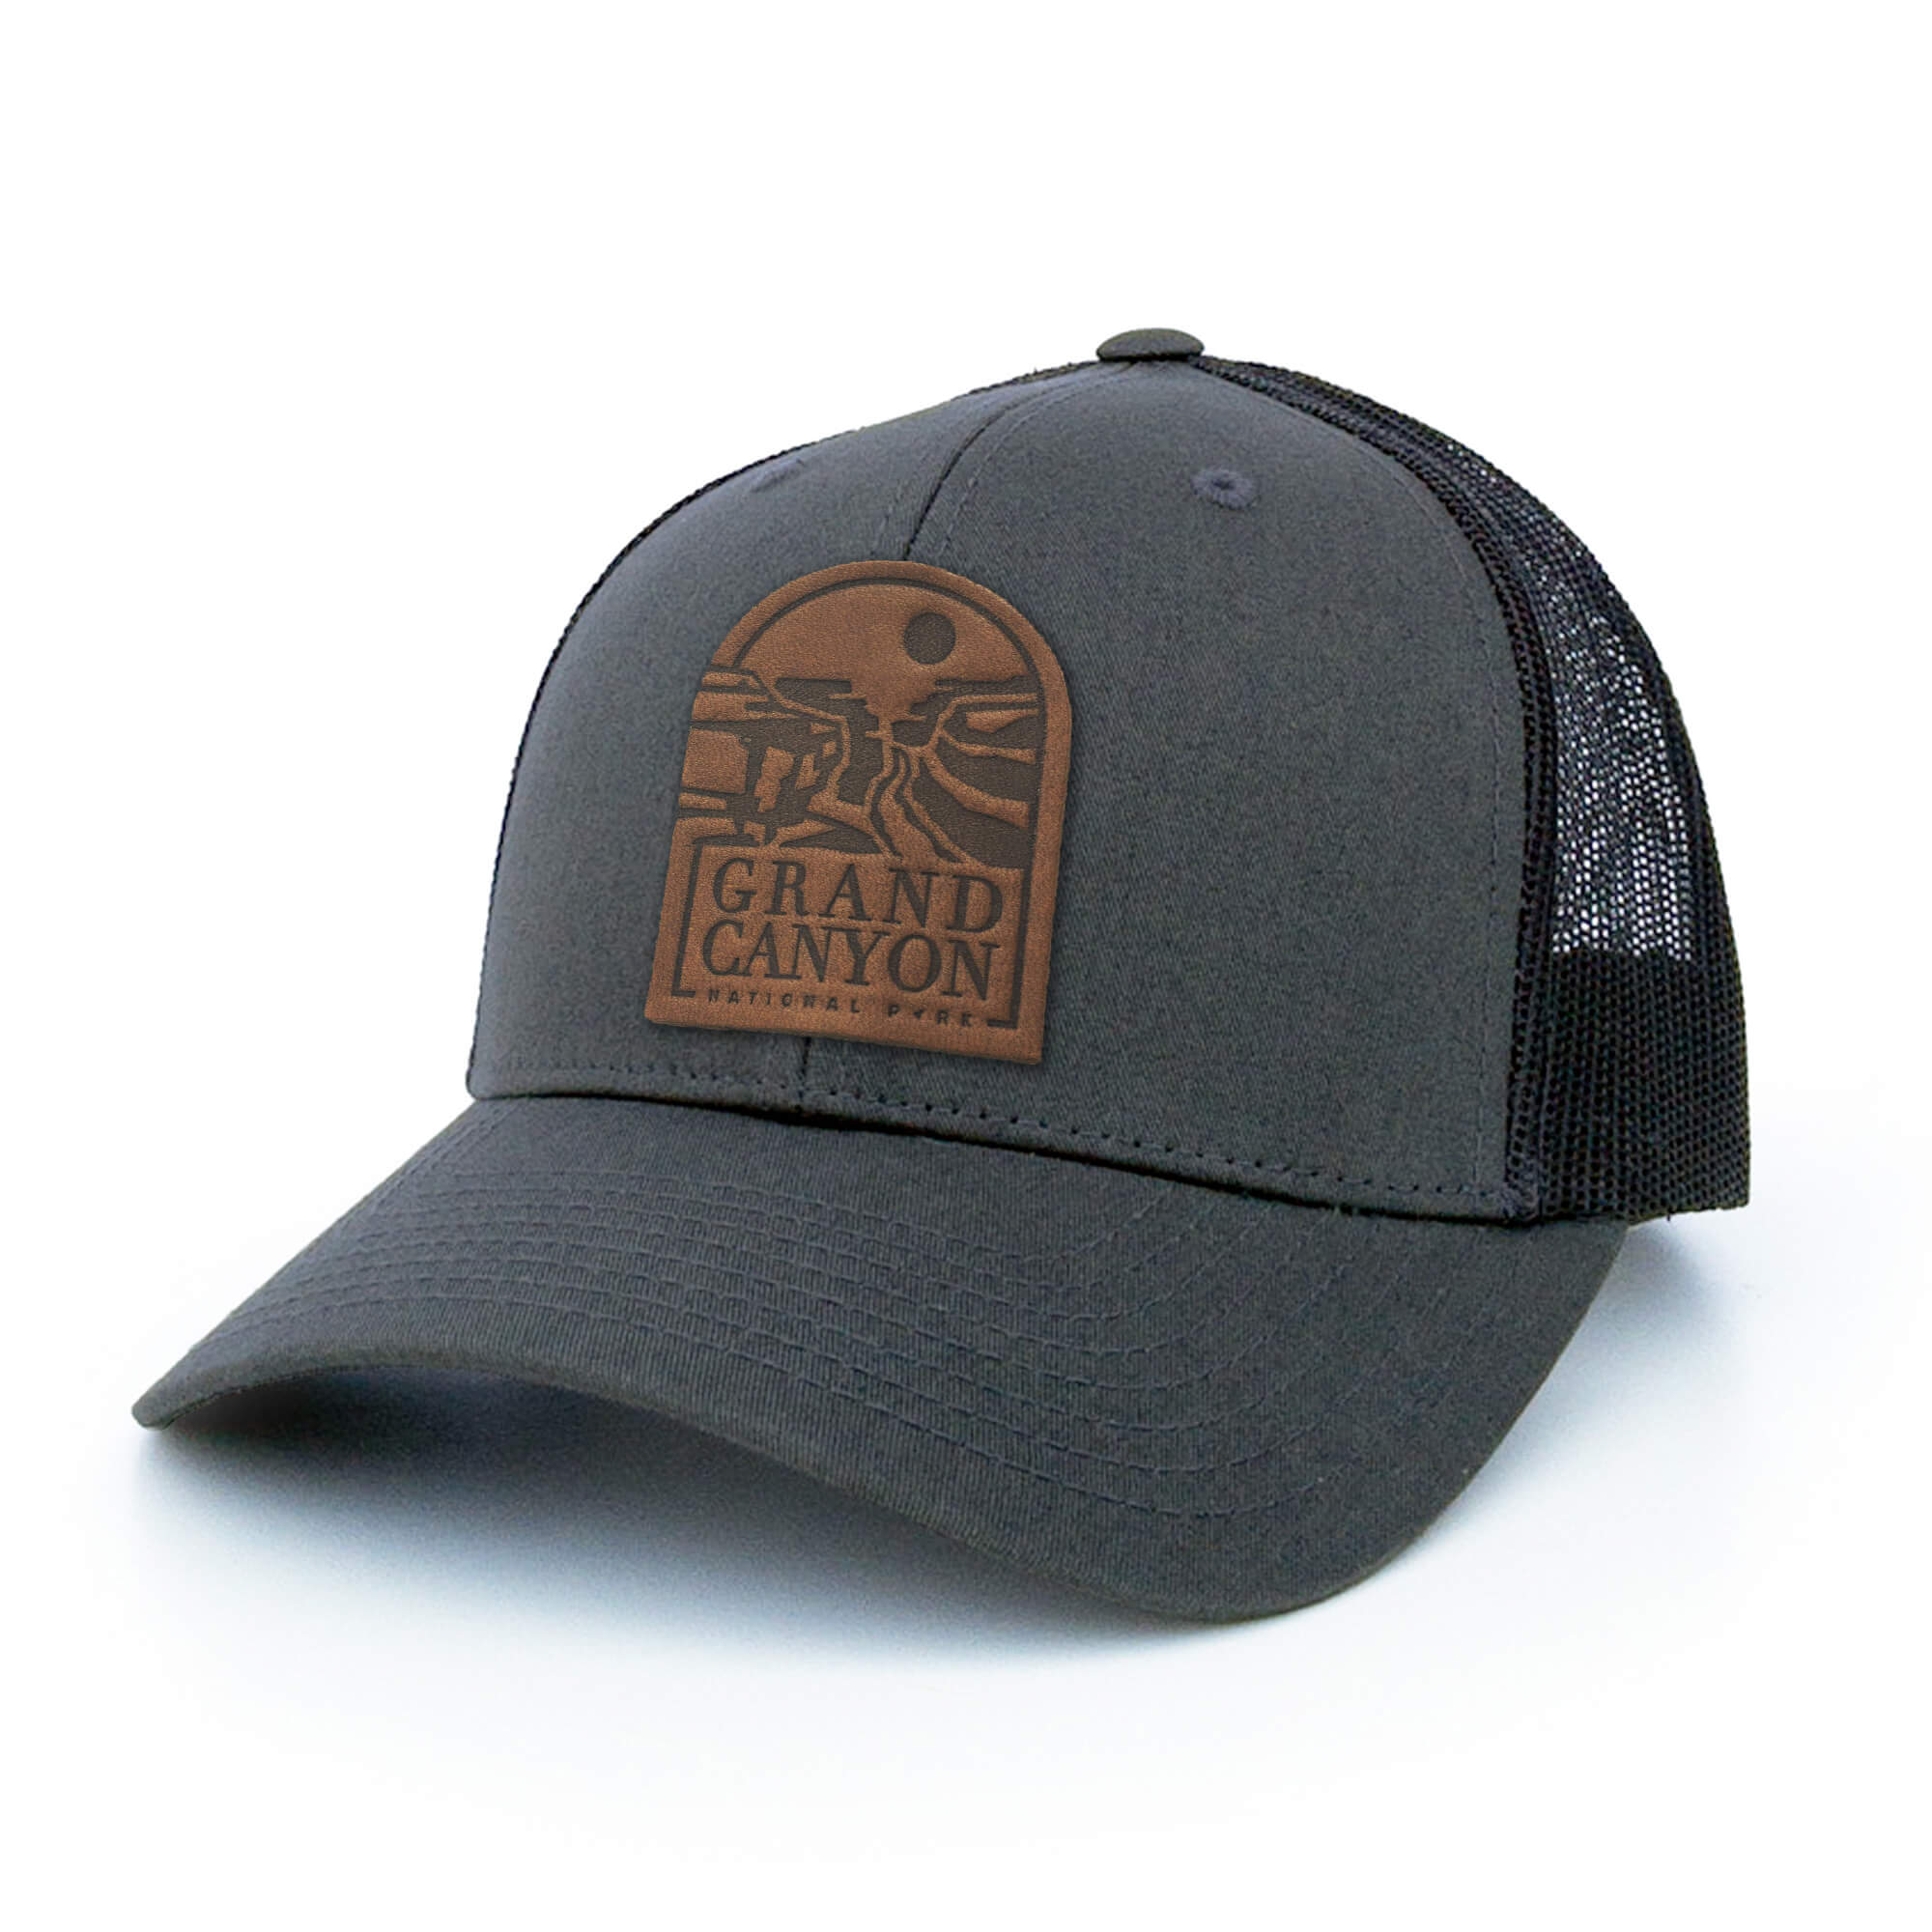 Charcoal trucker hat with full-grain leather patch of Grand Canyon National Park | BLACK-007-004, CHARC-007-004, NAVY-007-004, HGREY-007-004, MOSS-007-004, BROWN-007-004